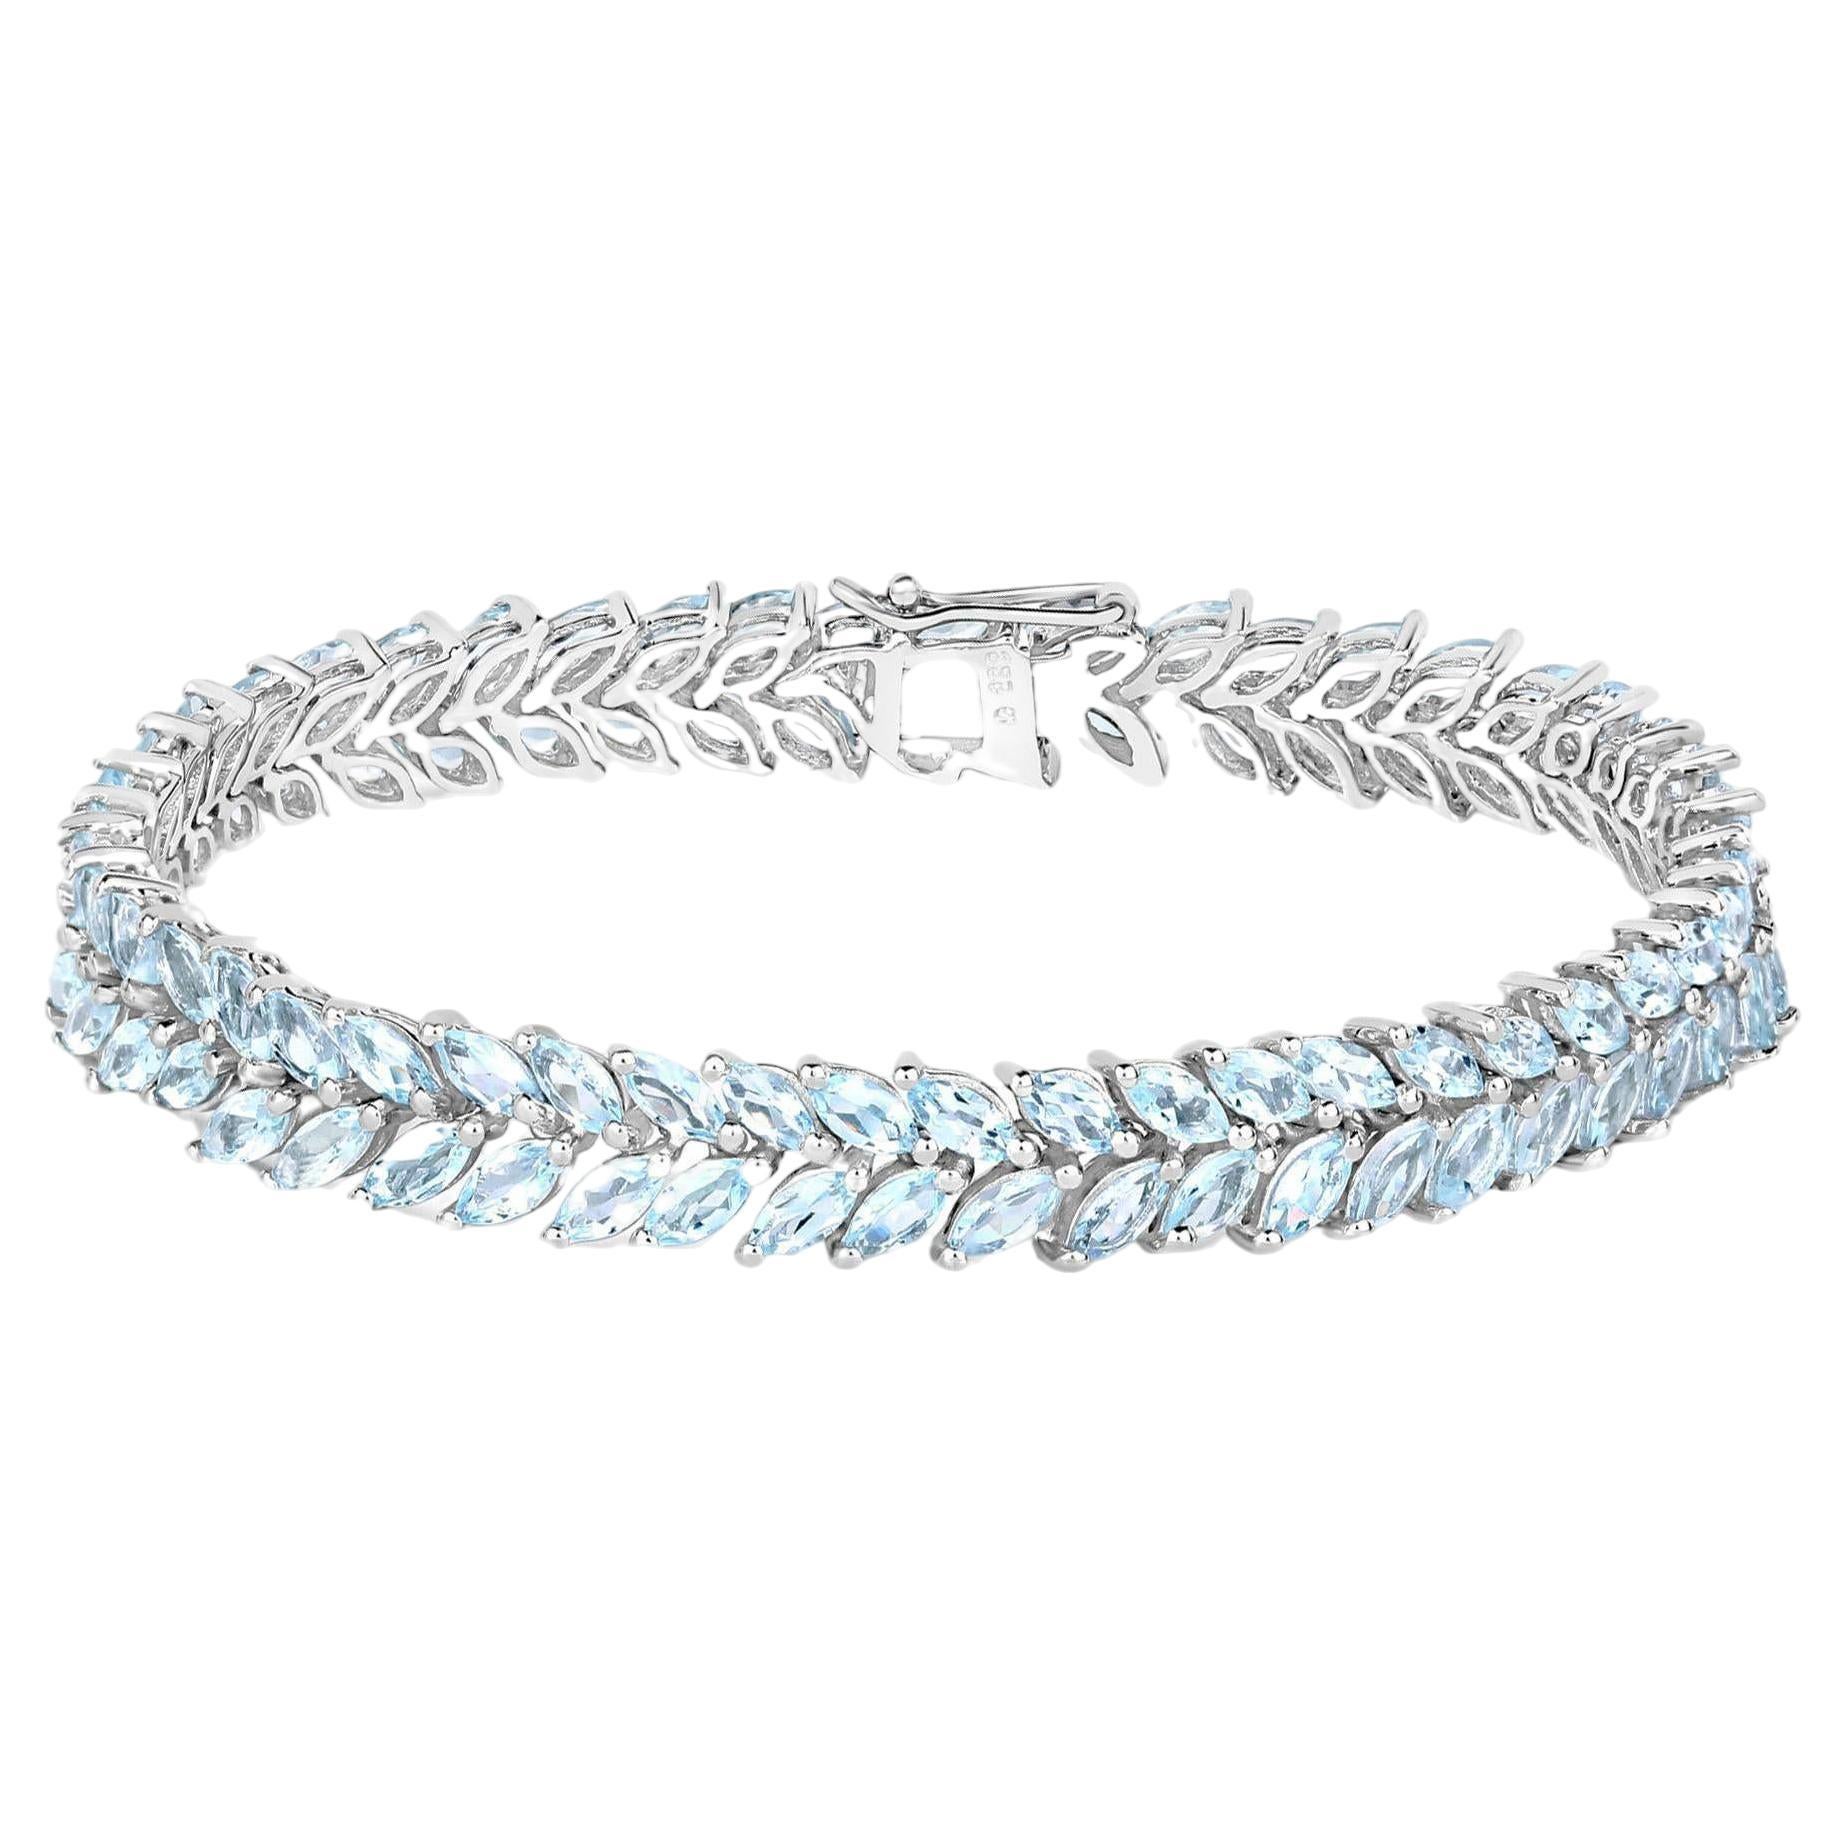 Marquise Cut Aquamarine Bracelet 10.12 Carats Sterling Silver For Sale